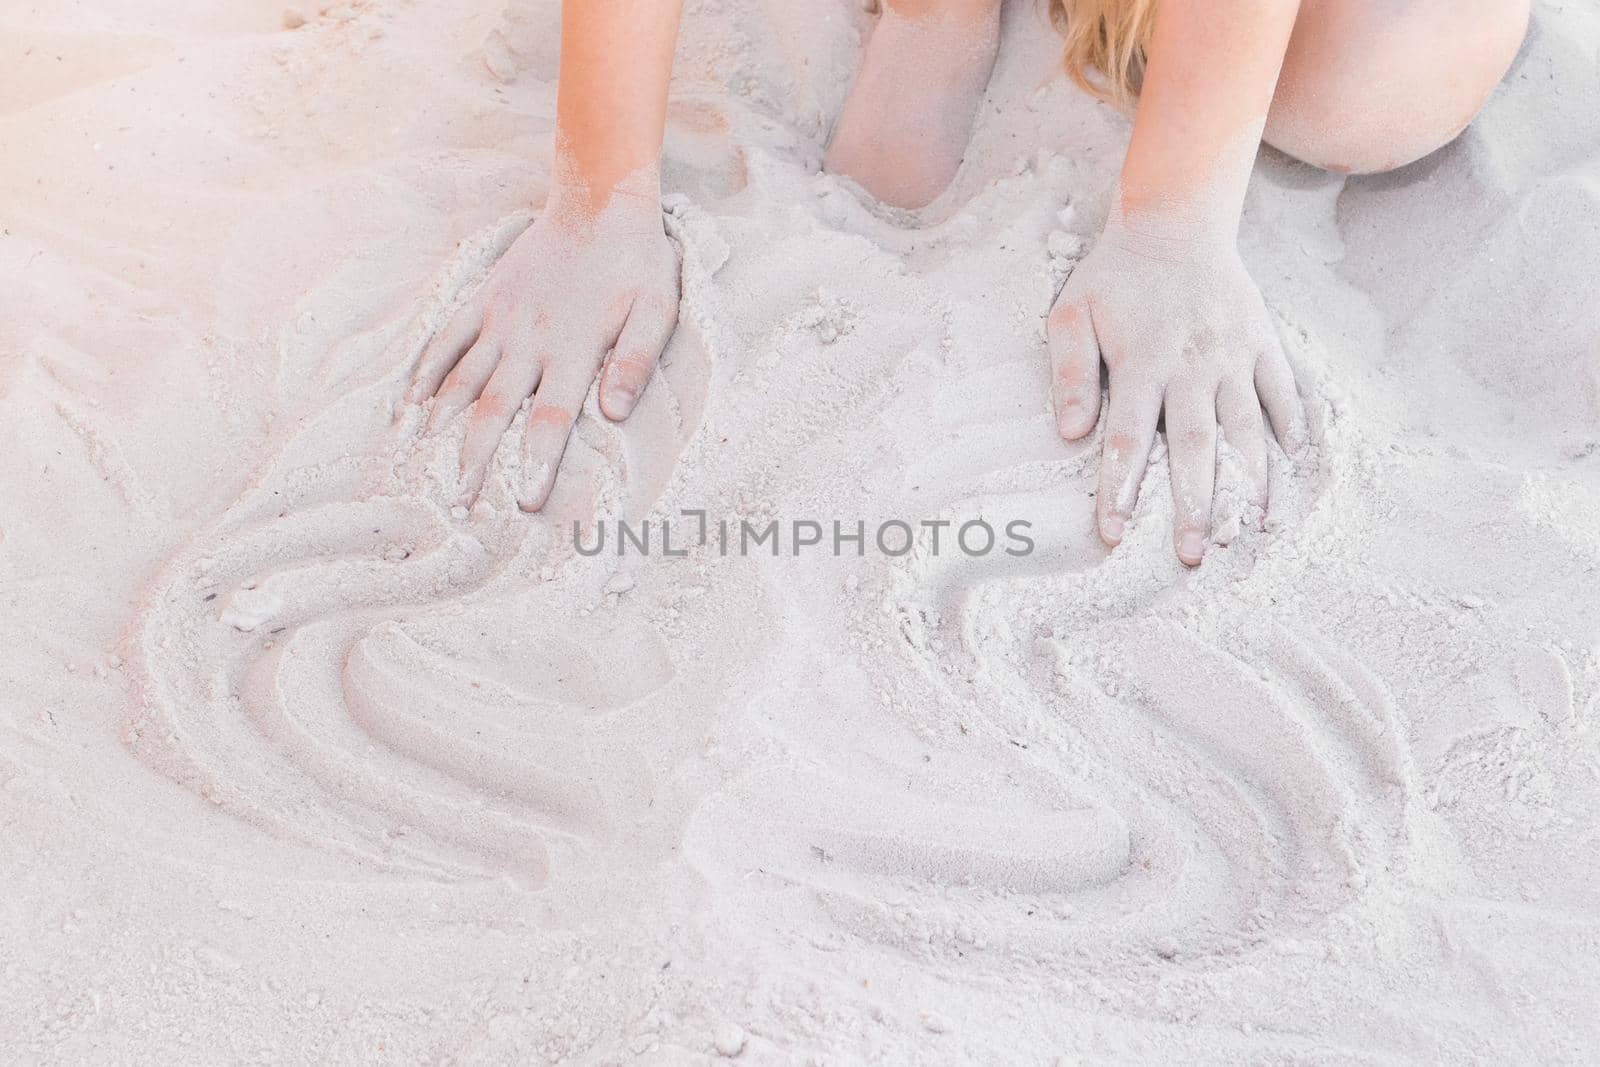 The hands of a young girl draw abstract patterns on a white beach sand background.